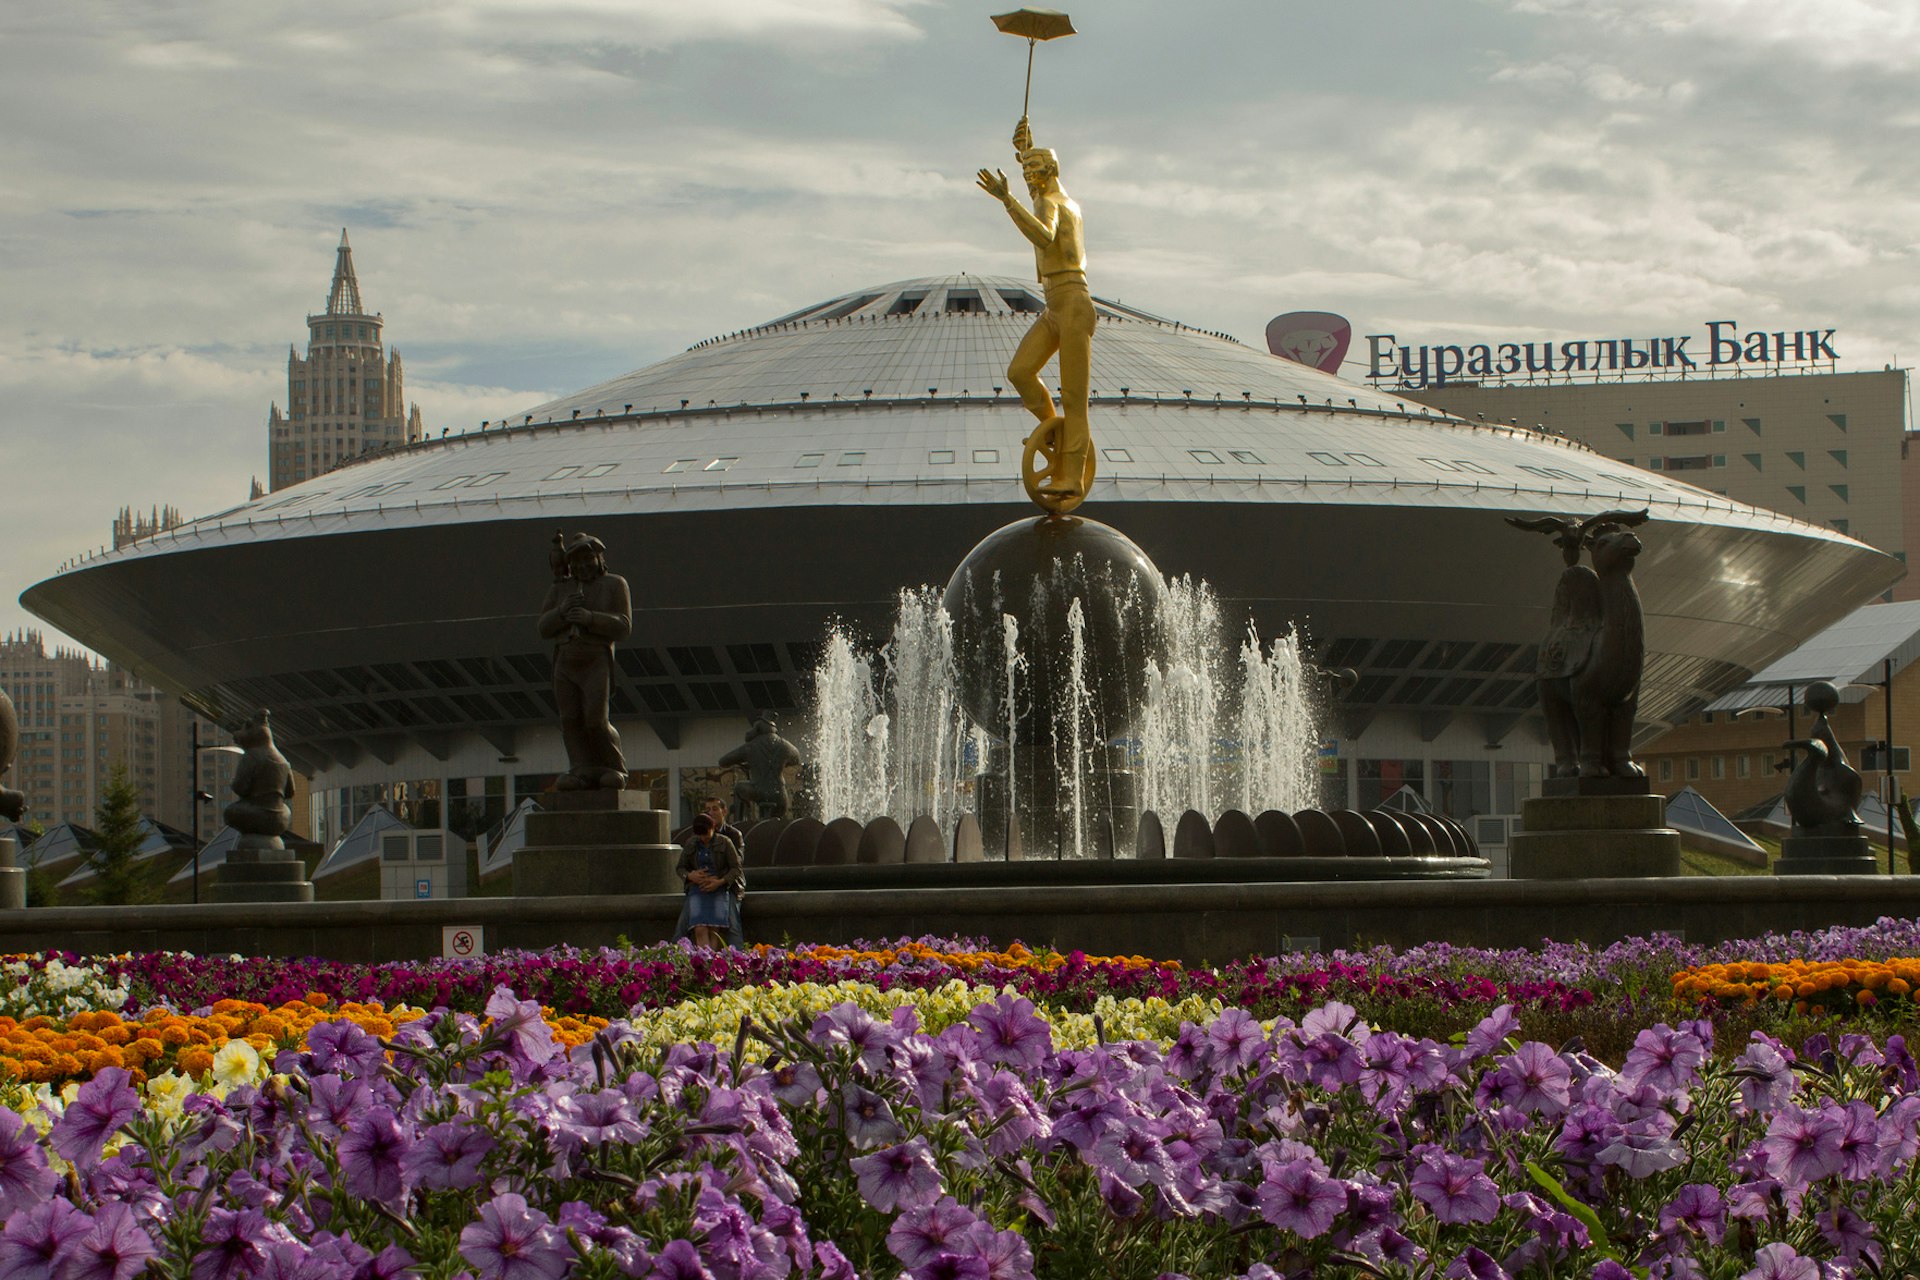 Metropolitan Circus: looks like a UFO landed in Astana. Image by Ben Dalton / CC BY 2.0